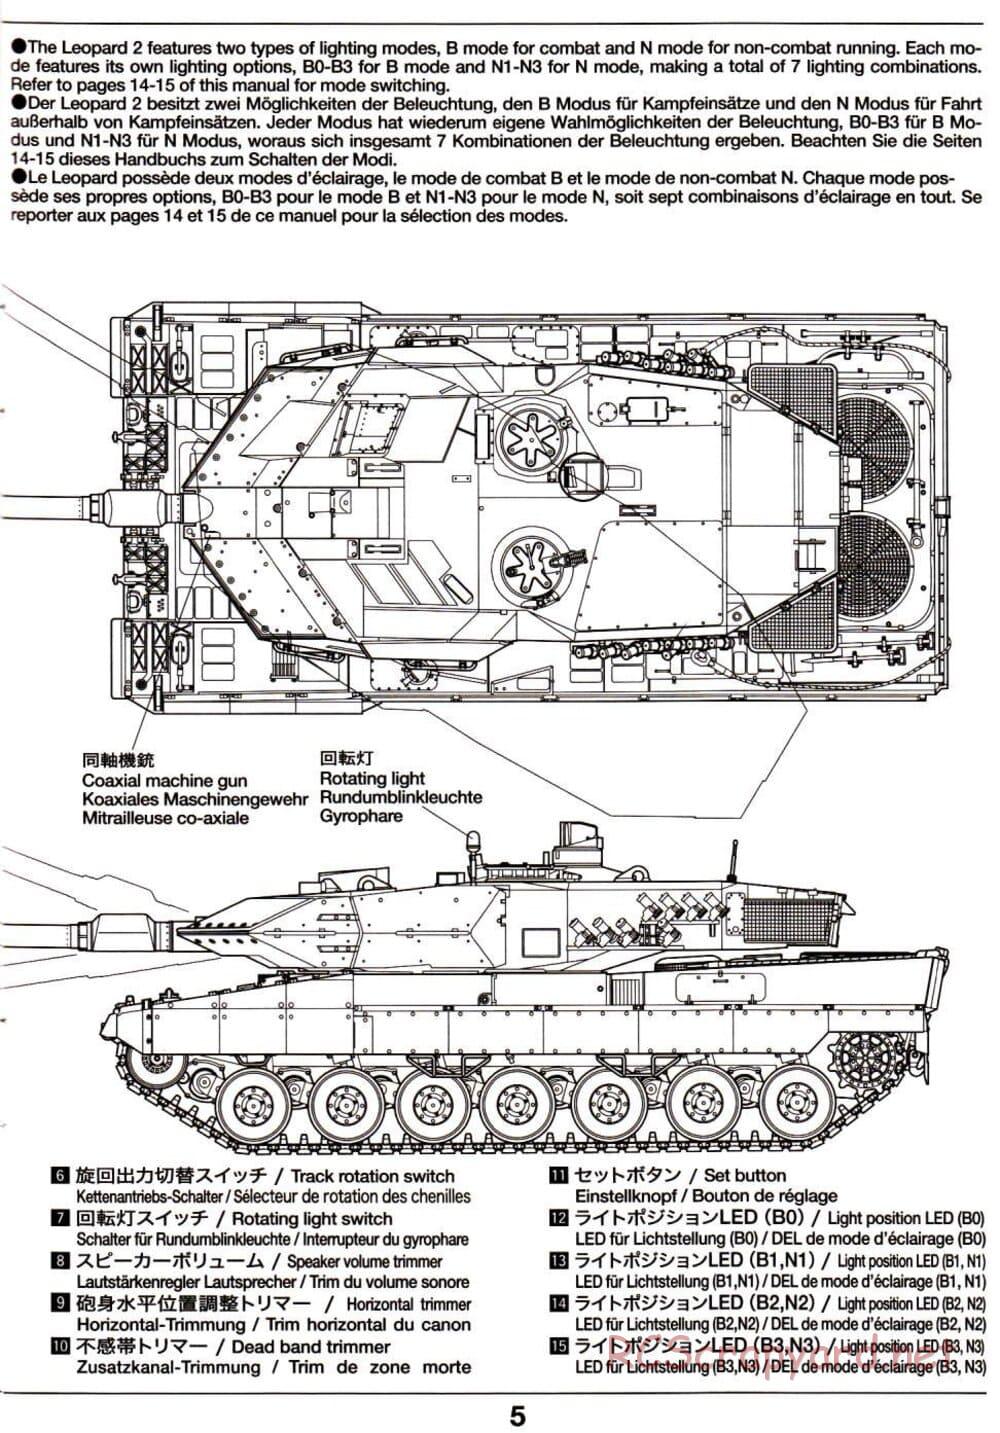 Tamiya - Leopard 2 A6 - 1/16 Scale Chassis - Operation Manual - Page 5